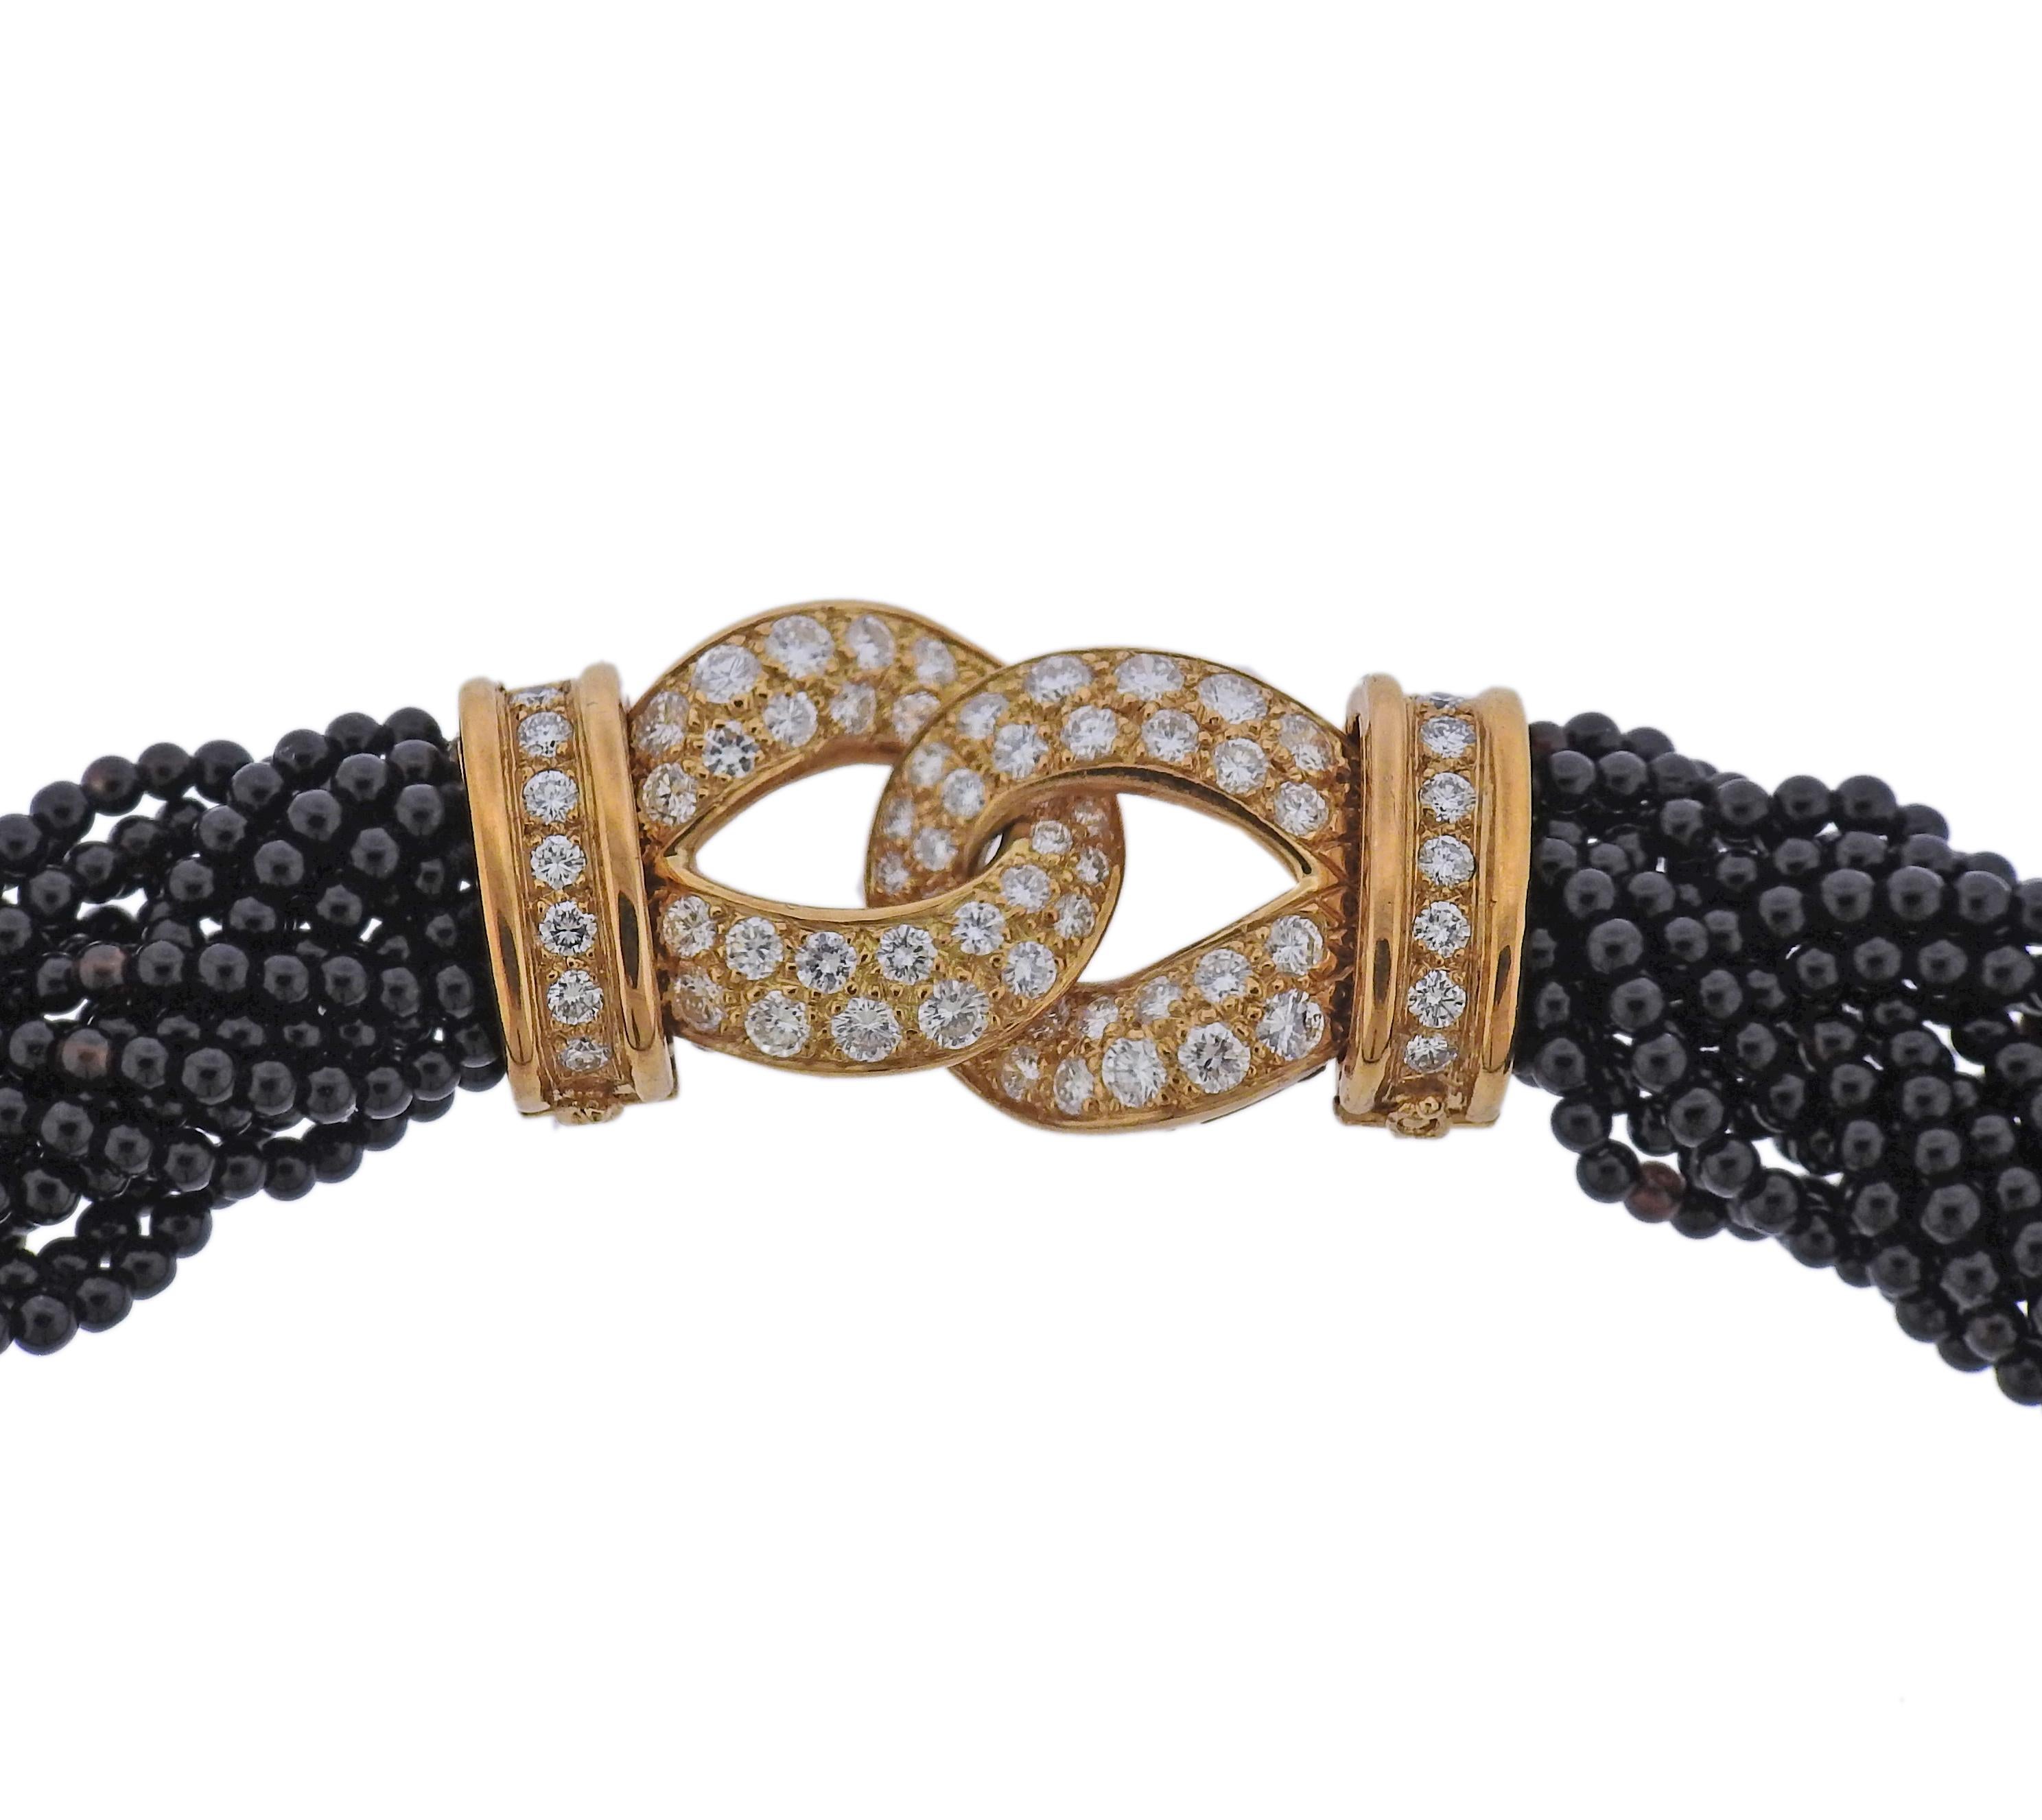 18k yellow gold braided necklace by Van Cleef & Arpels with onyx beads and 2.14ctw in VVS/F-G diamonds. Comes with VCA pouch and a copy of original Valuation report by VCA. Necklace is 15.25